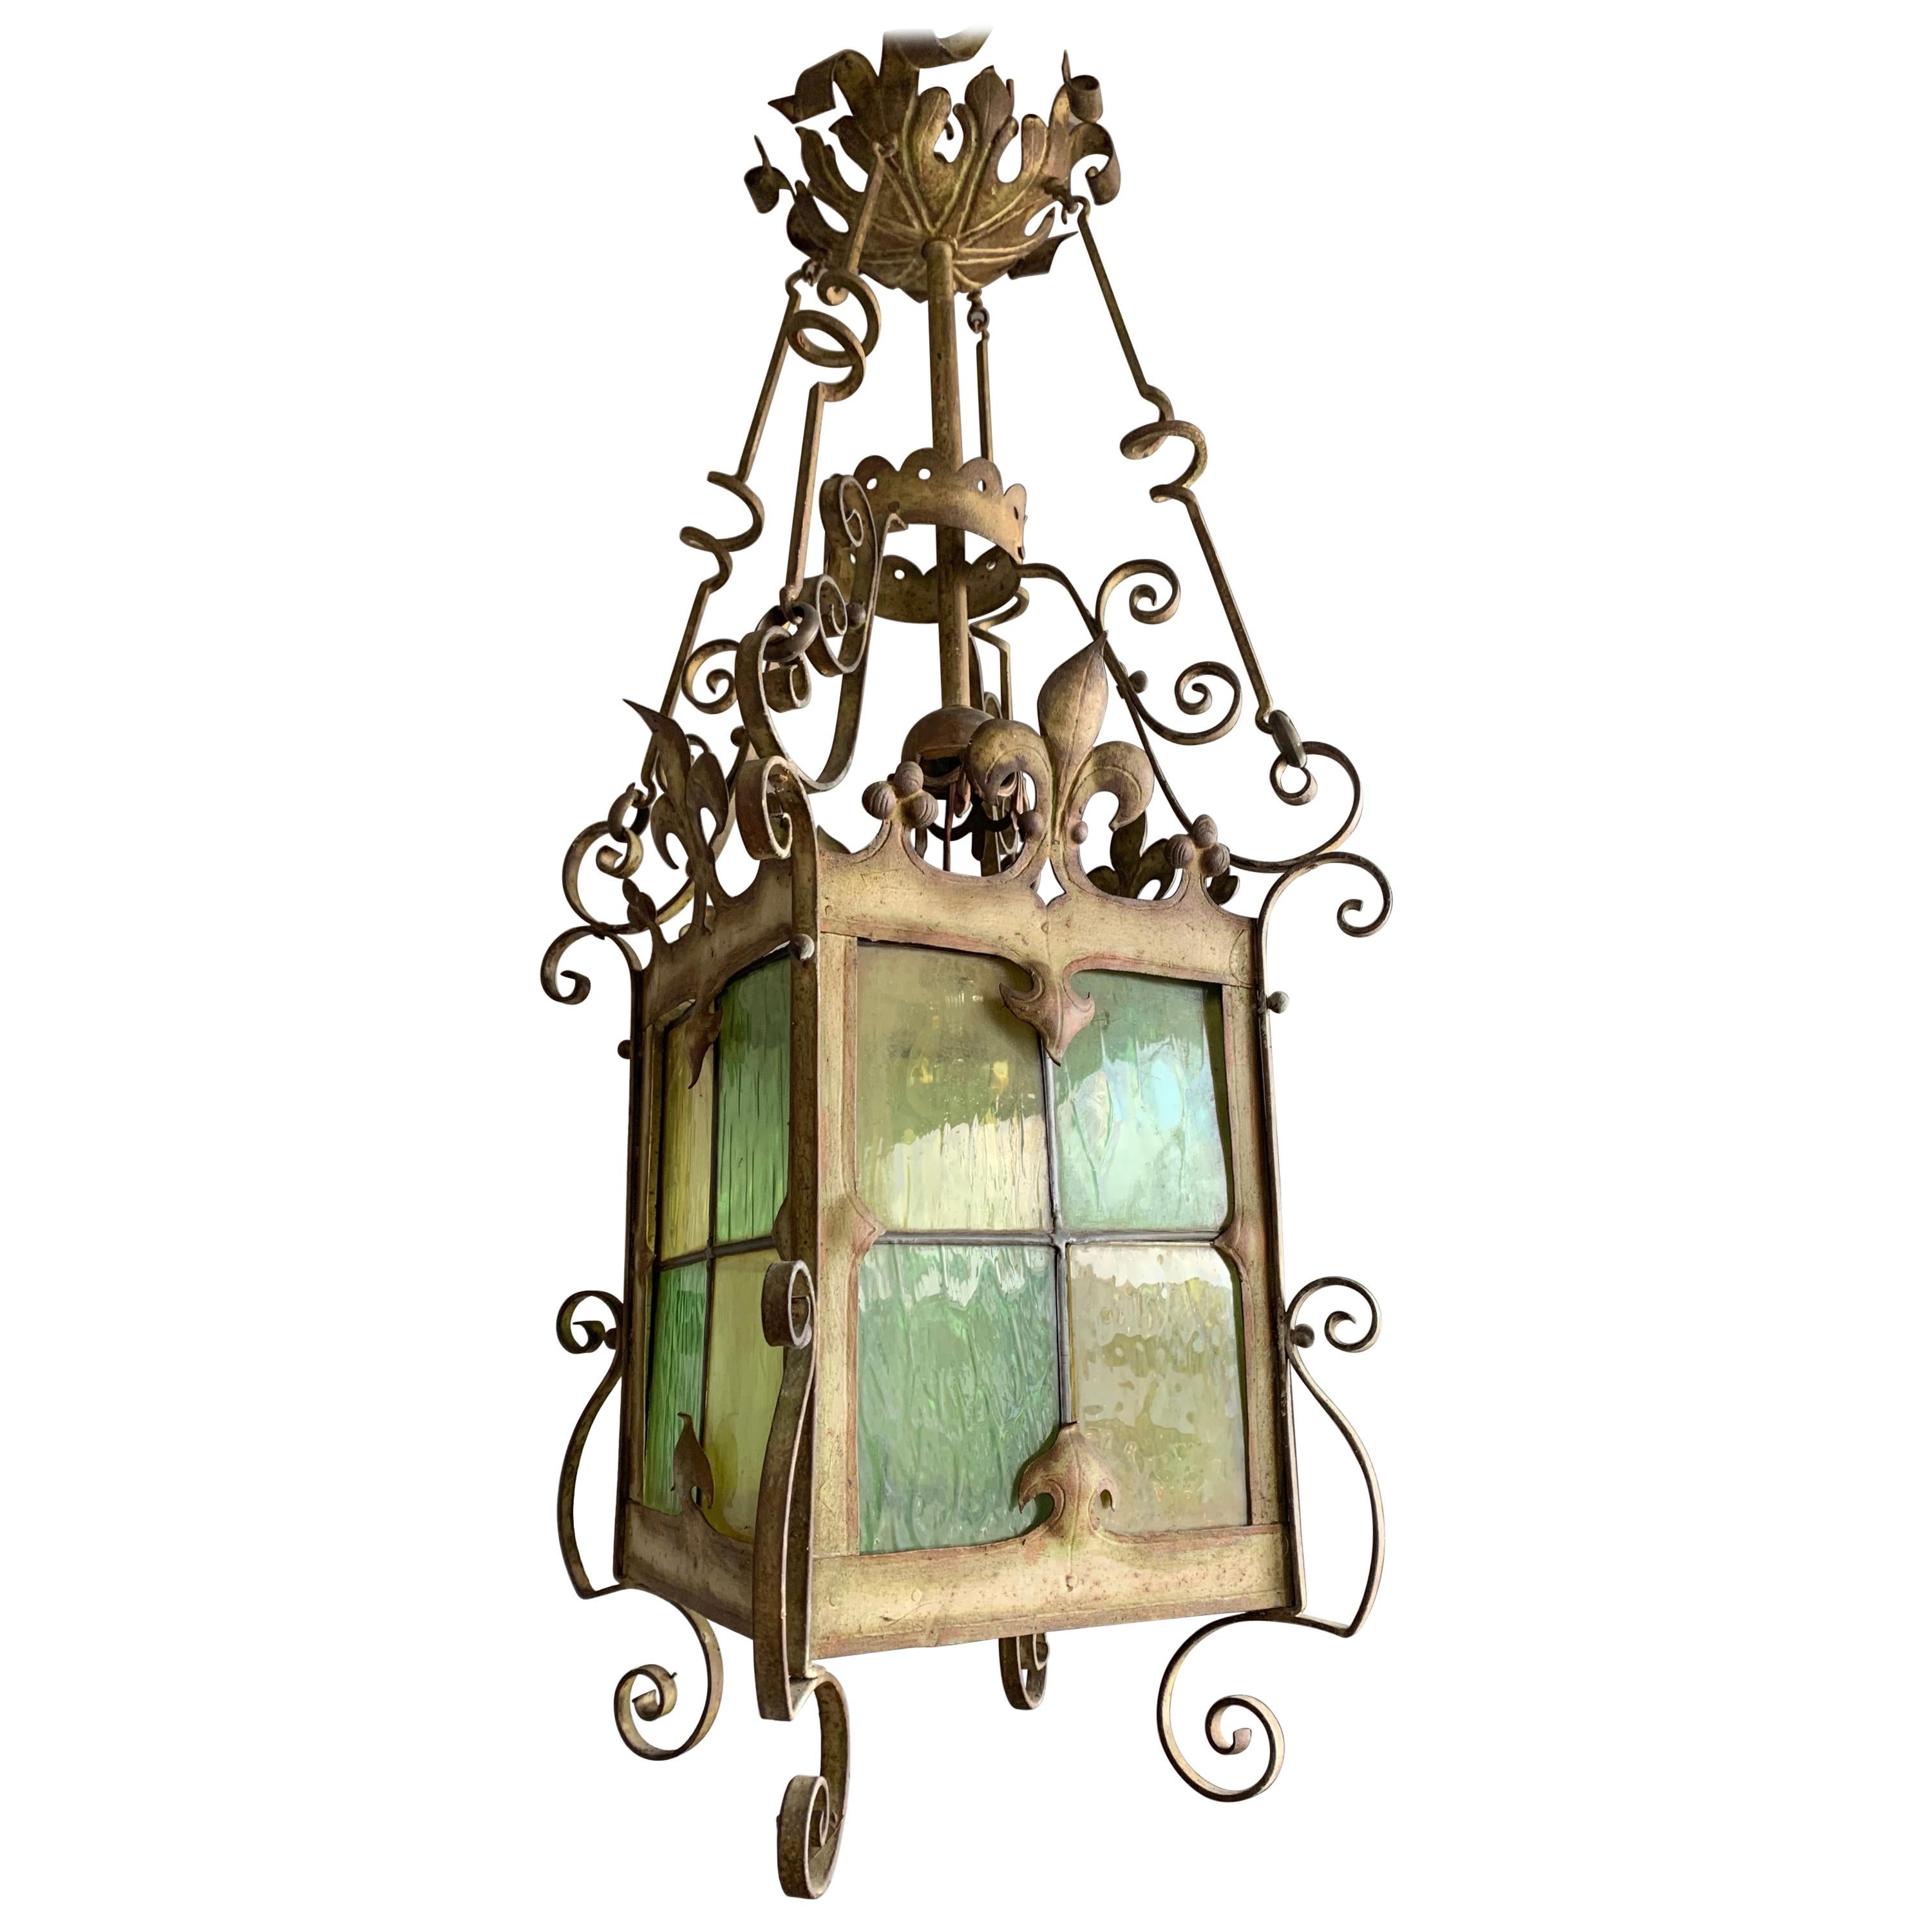 Extra Large Antique Gothic / Medieval Style Wrought Iron & Glass Art Lantern